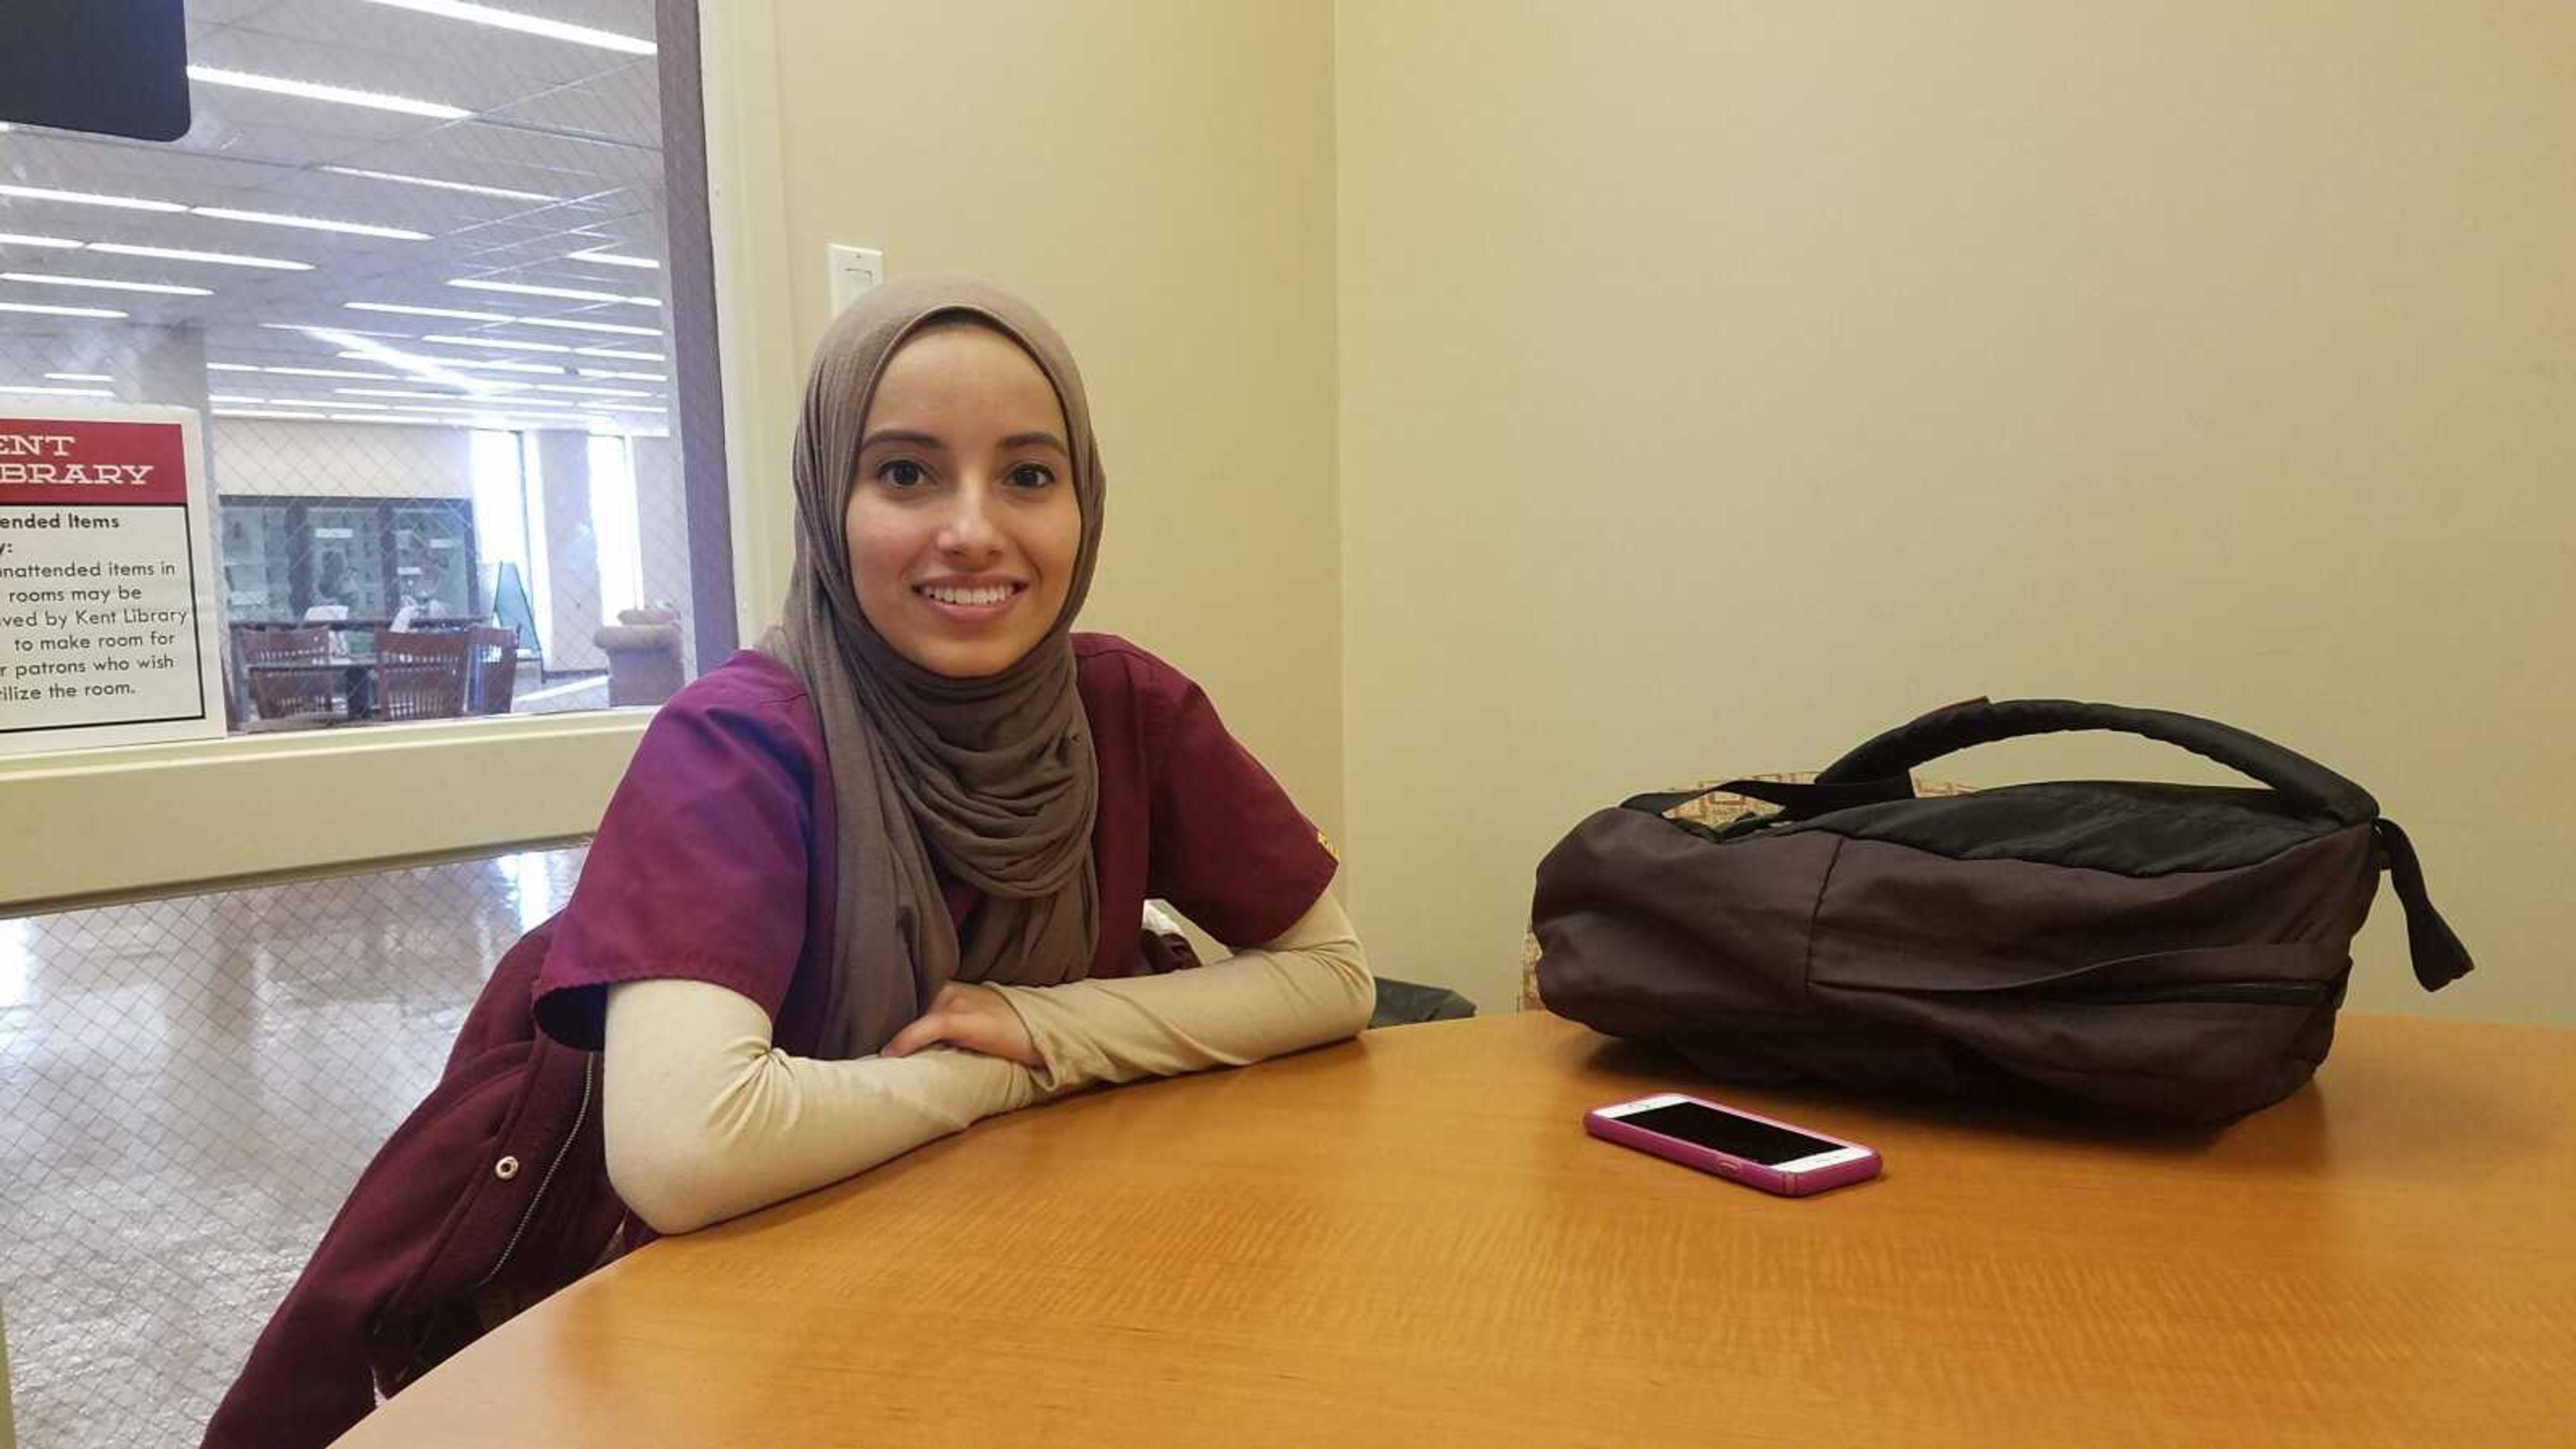 Sophomore Abrar Aleman was born in Yeman and came to the united States when she was 4 years old so her father could go to school.